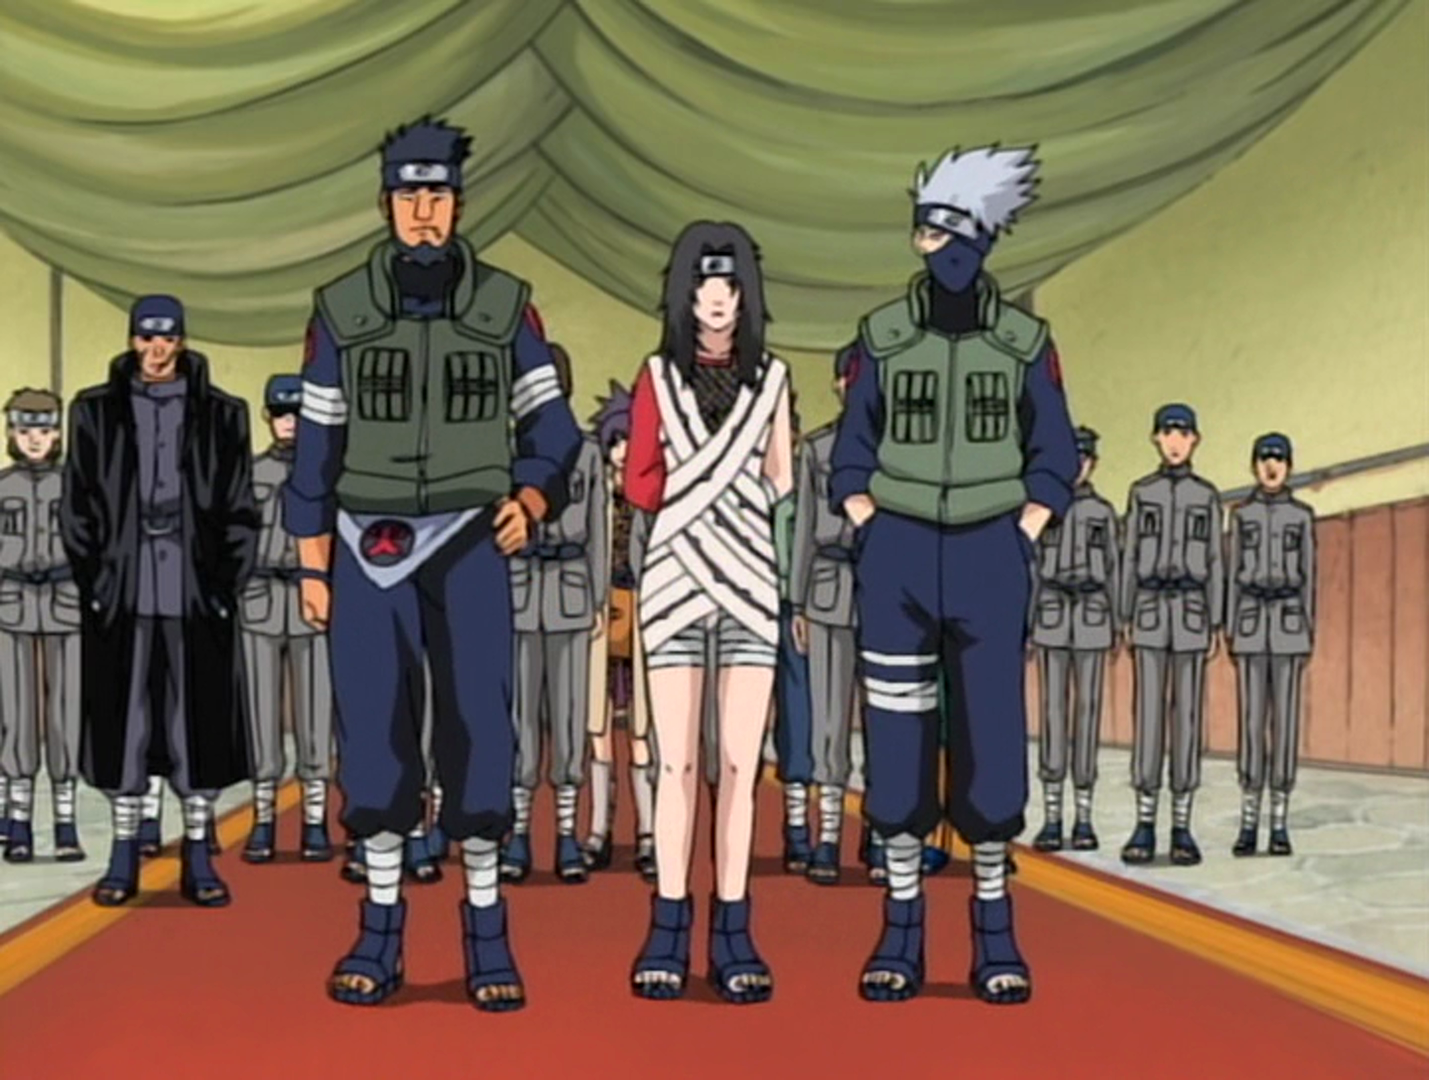 Naruto: 10 Characters Who Were Jonin Level (But Never Became One)